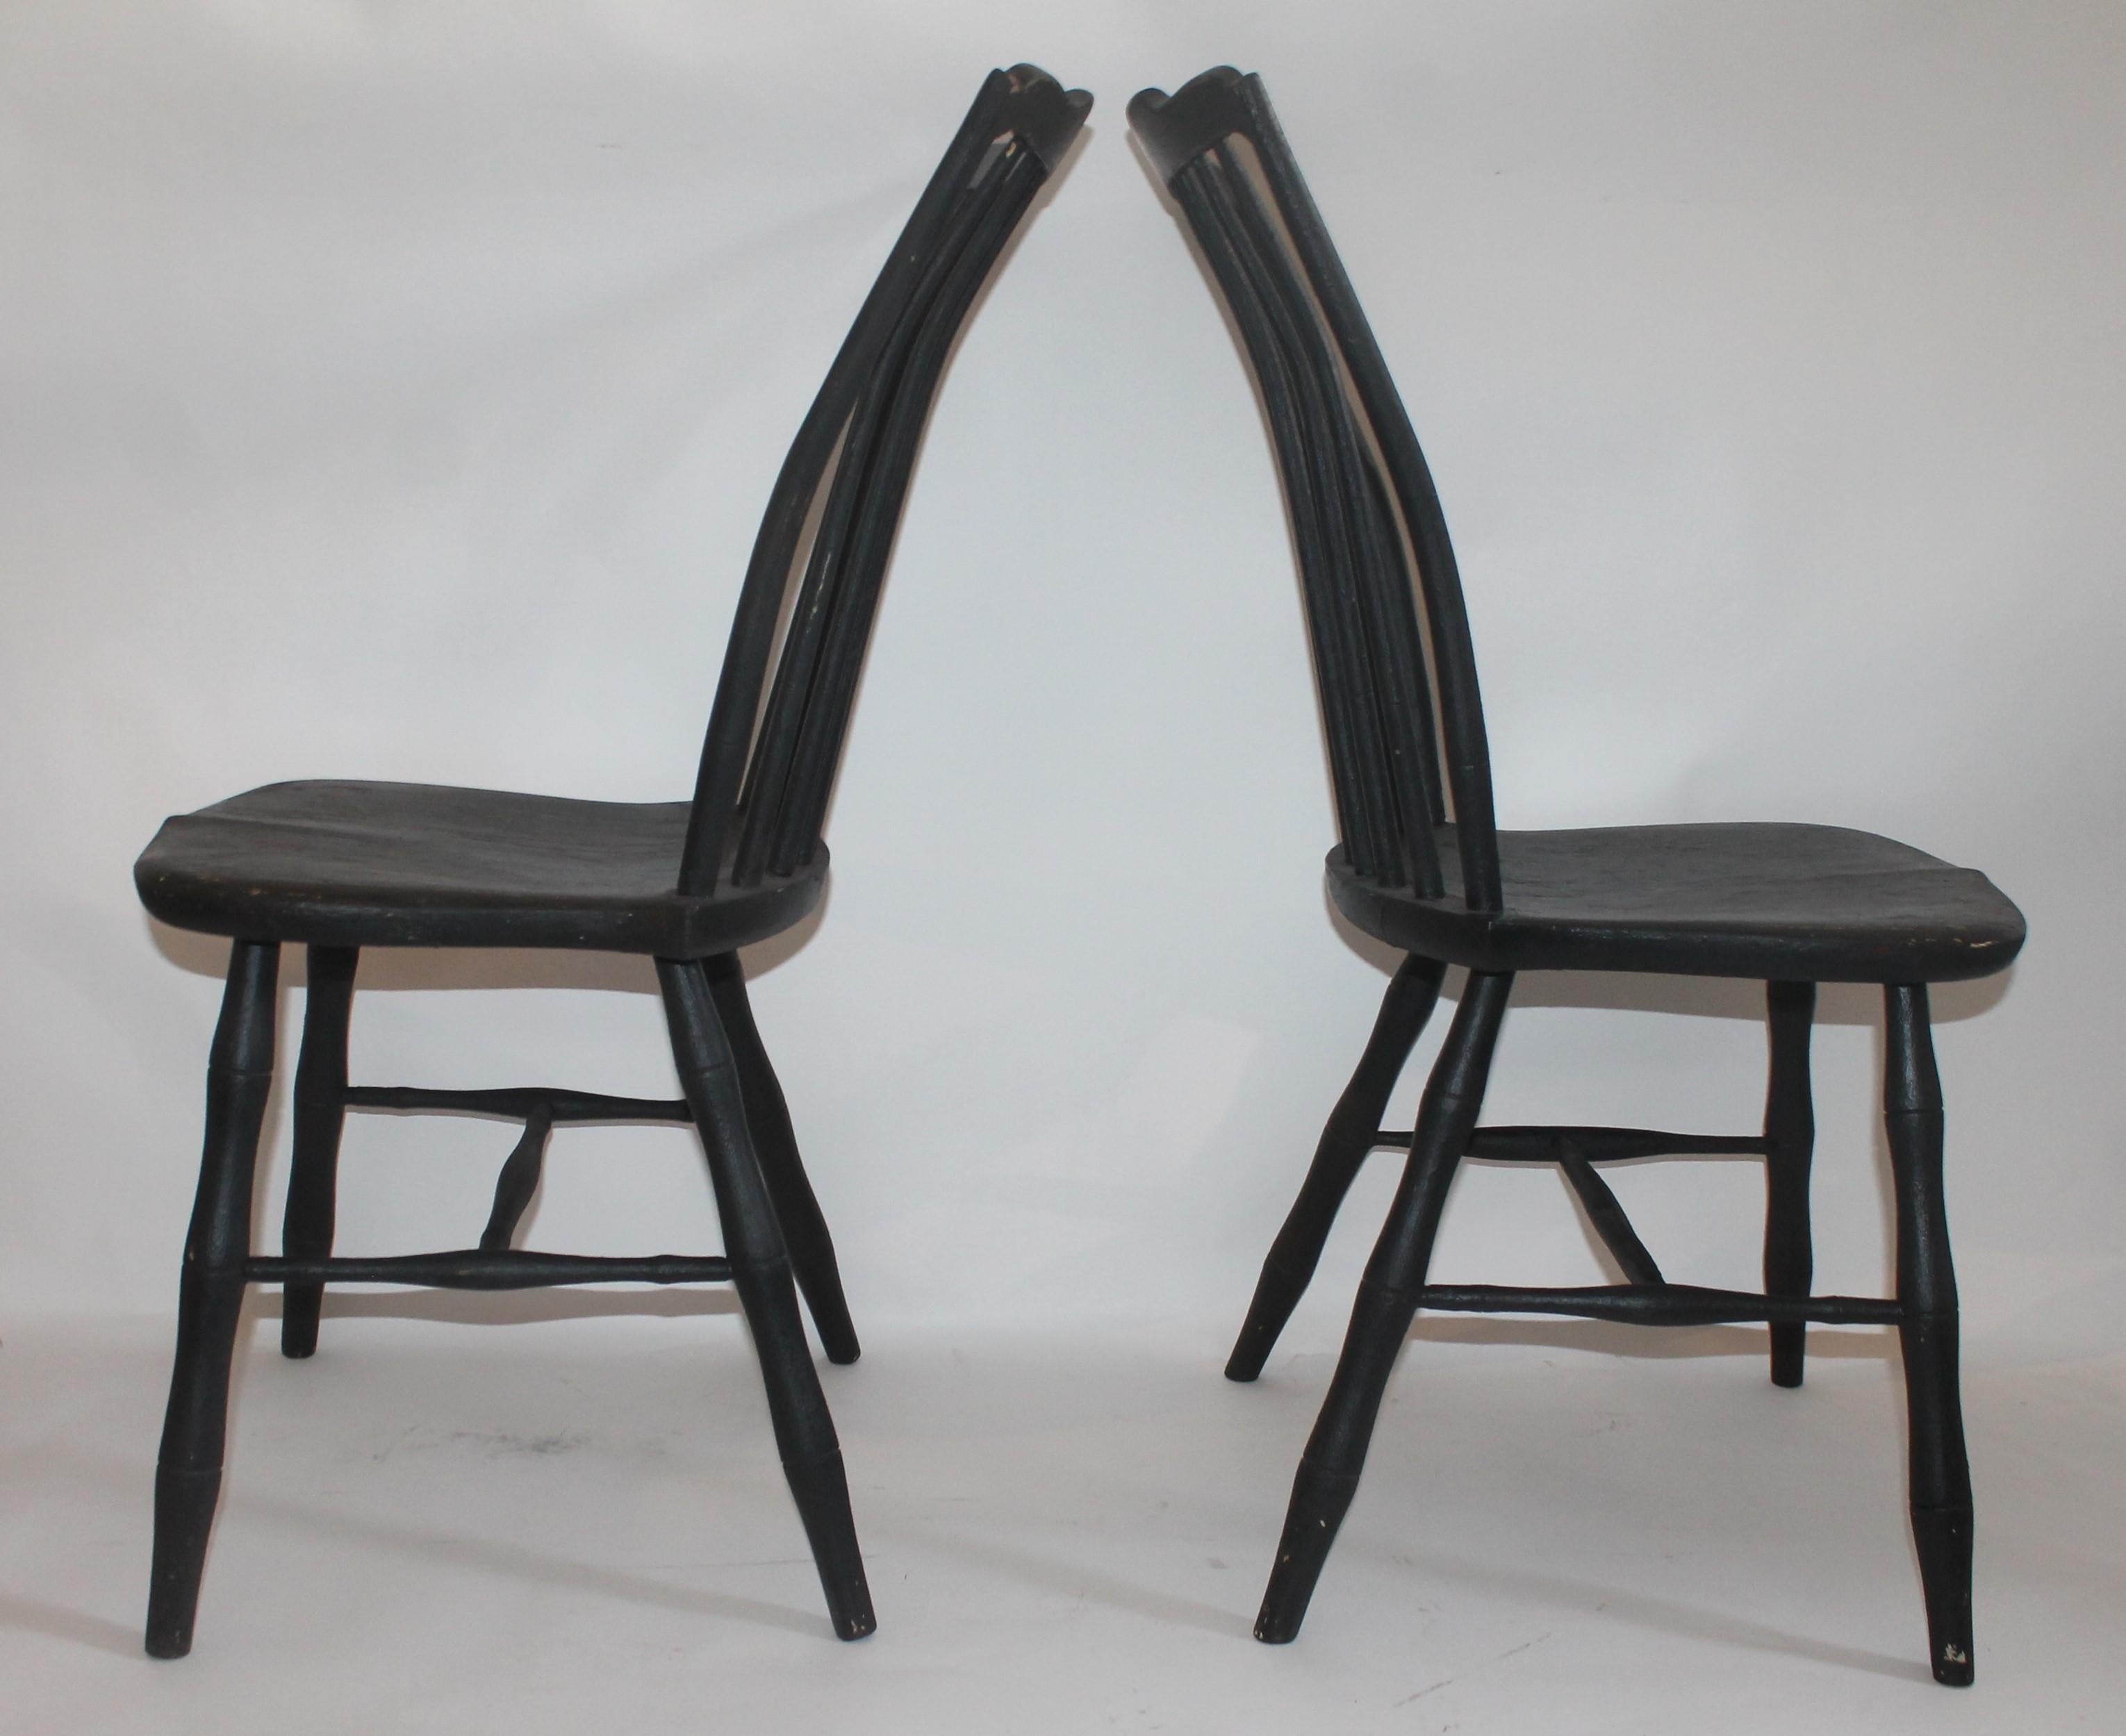 Pair of Windsor chairs with a second generation coat of paint. The wear on the over paint shows the original cream colored paint underneath. Both chairs have been tightened for strength and stability.